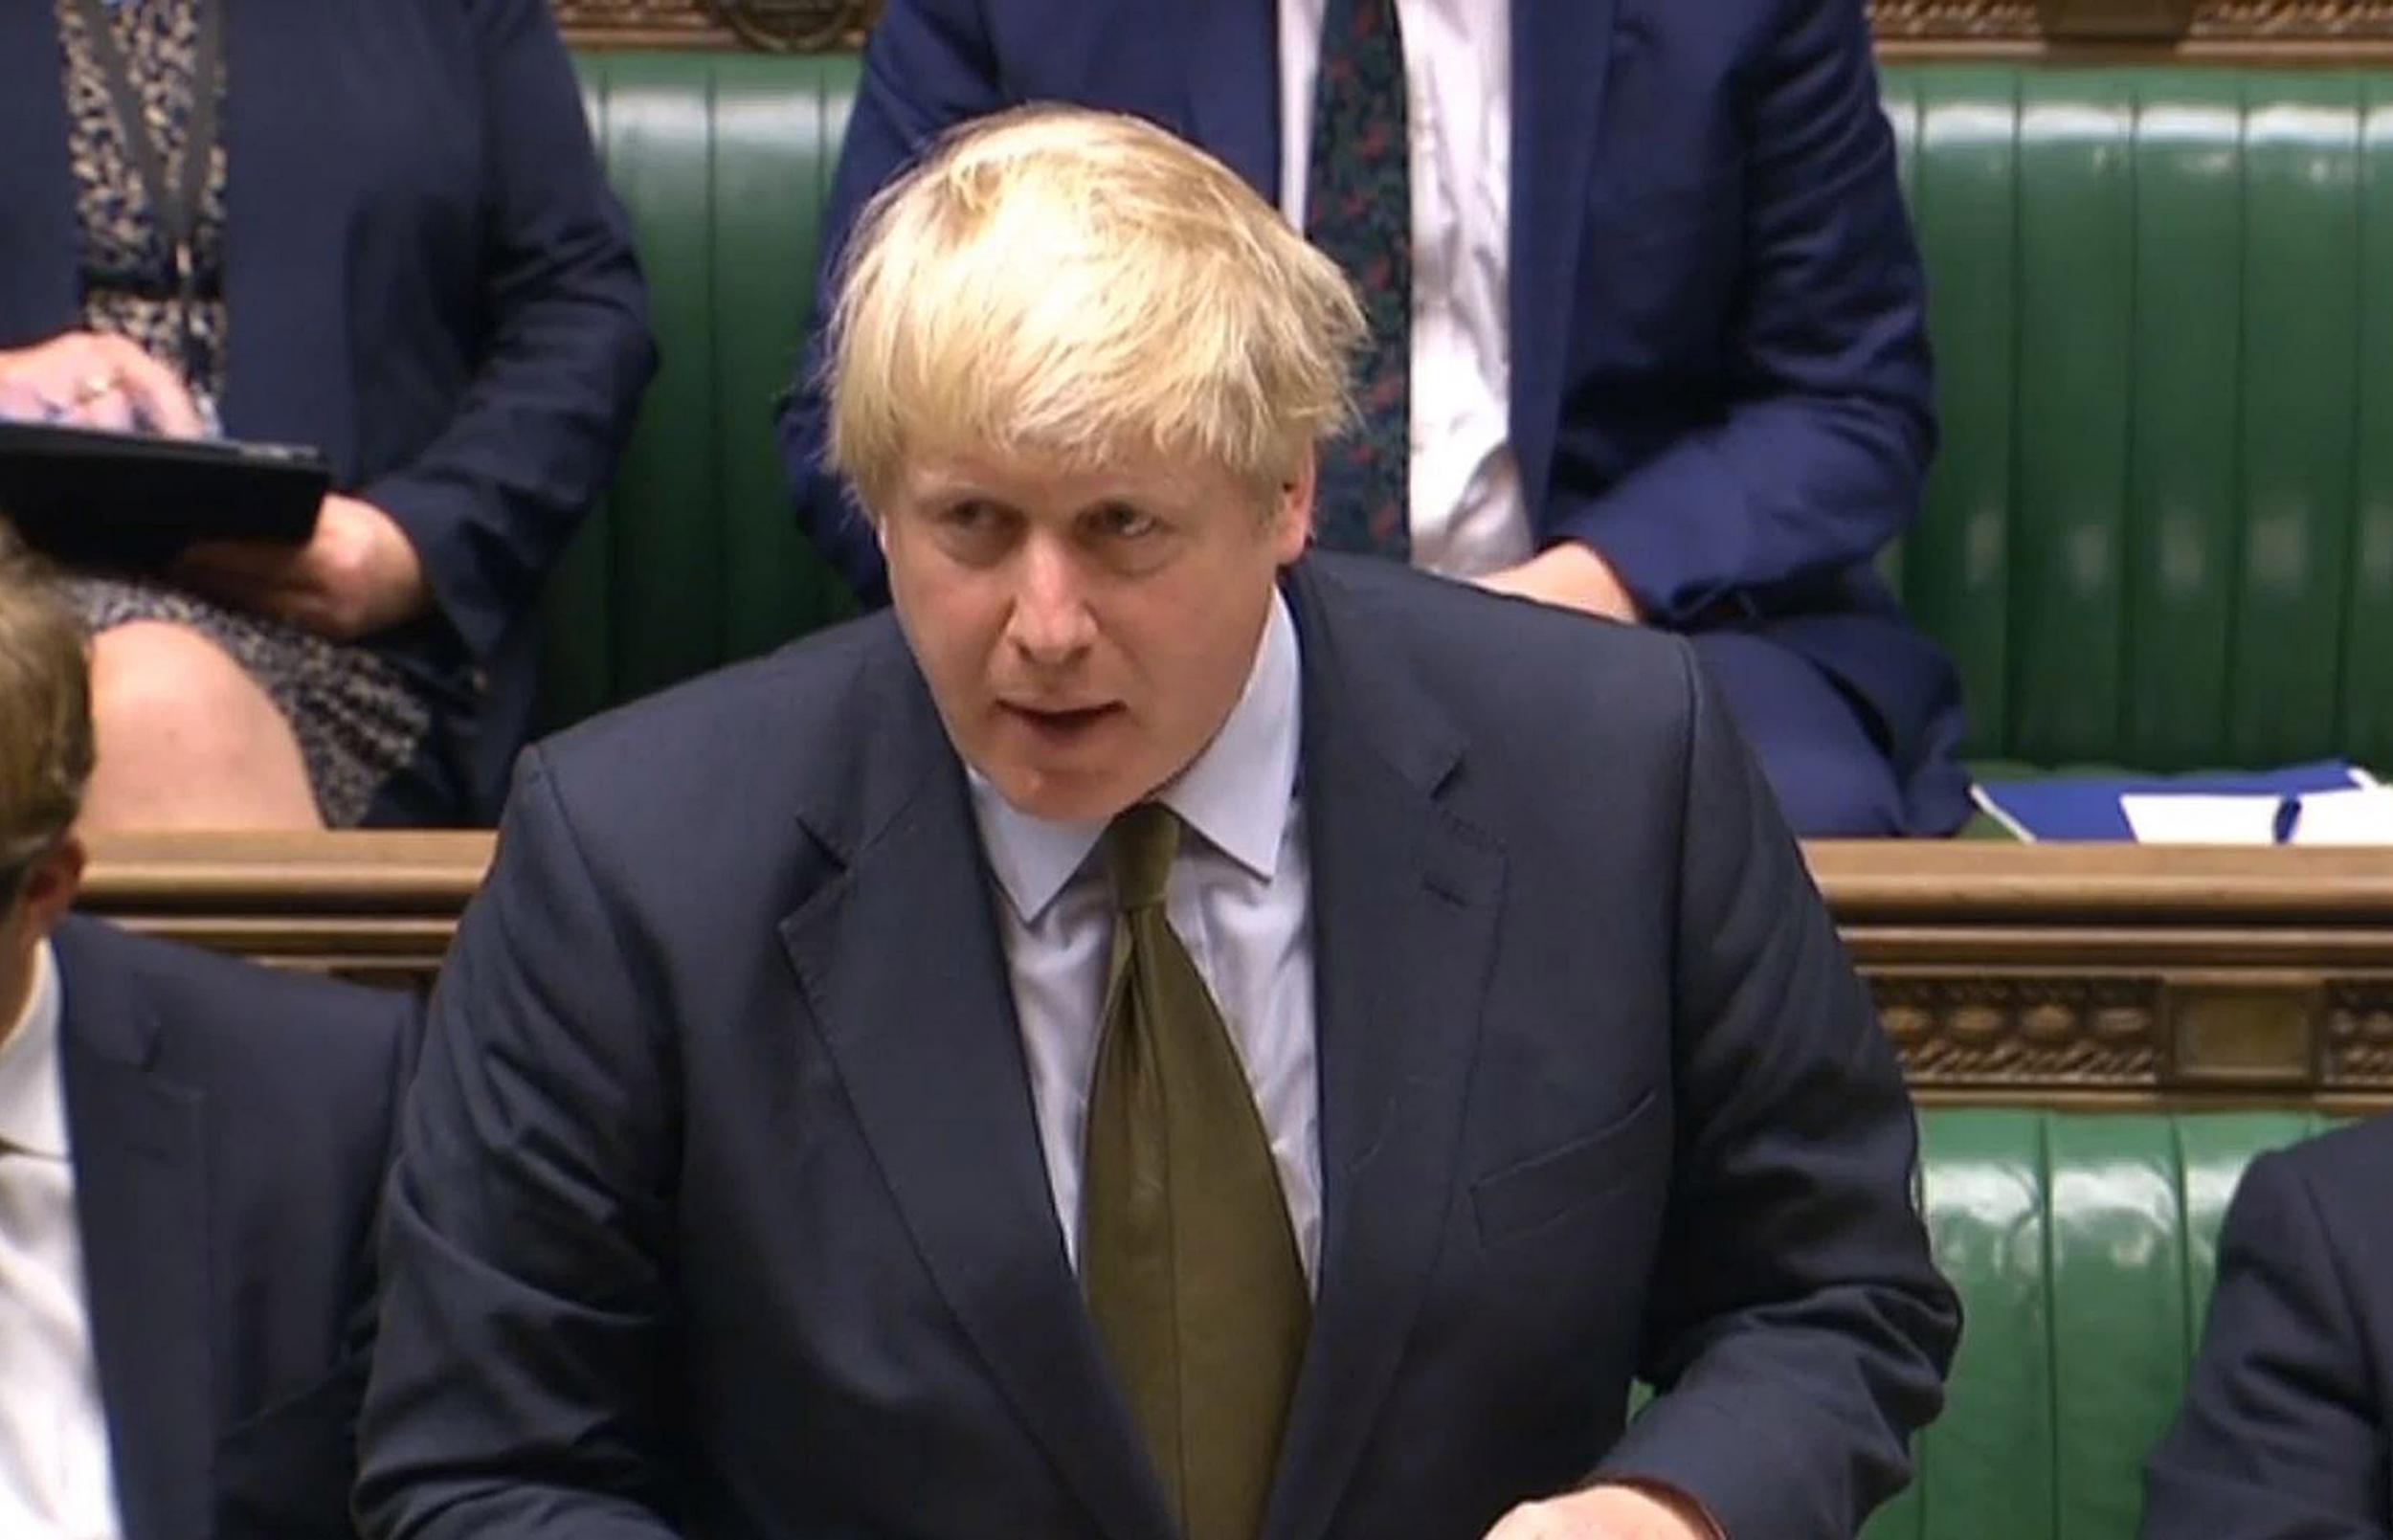 Foreign Secretary Boris Johnson speaks during an emergency debate on international action to protect civilians in Aleppo, Syria